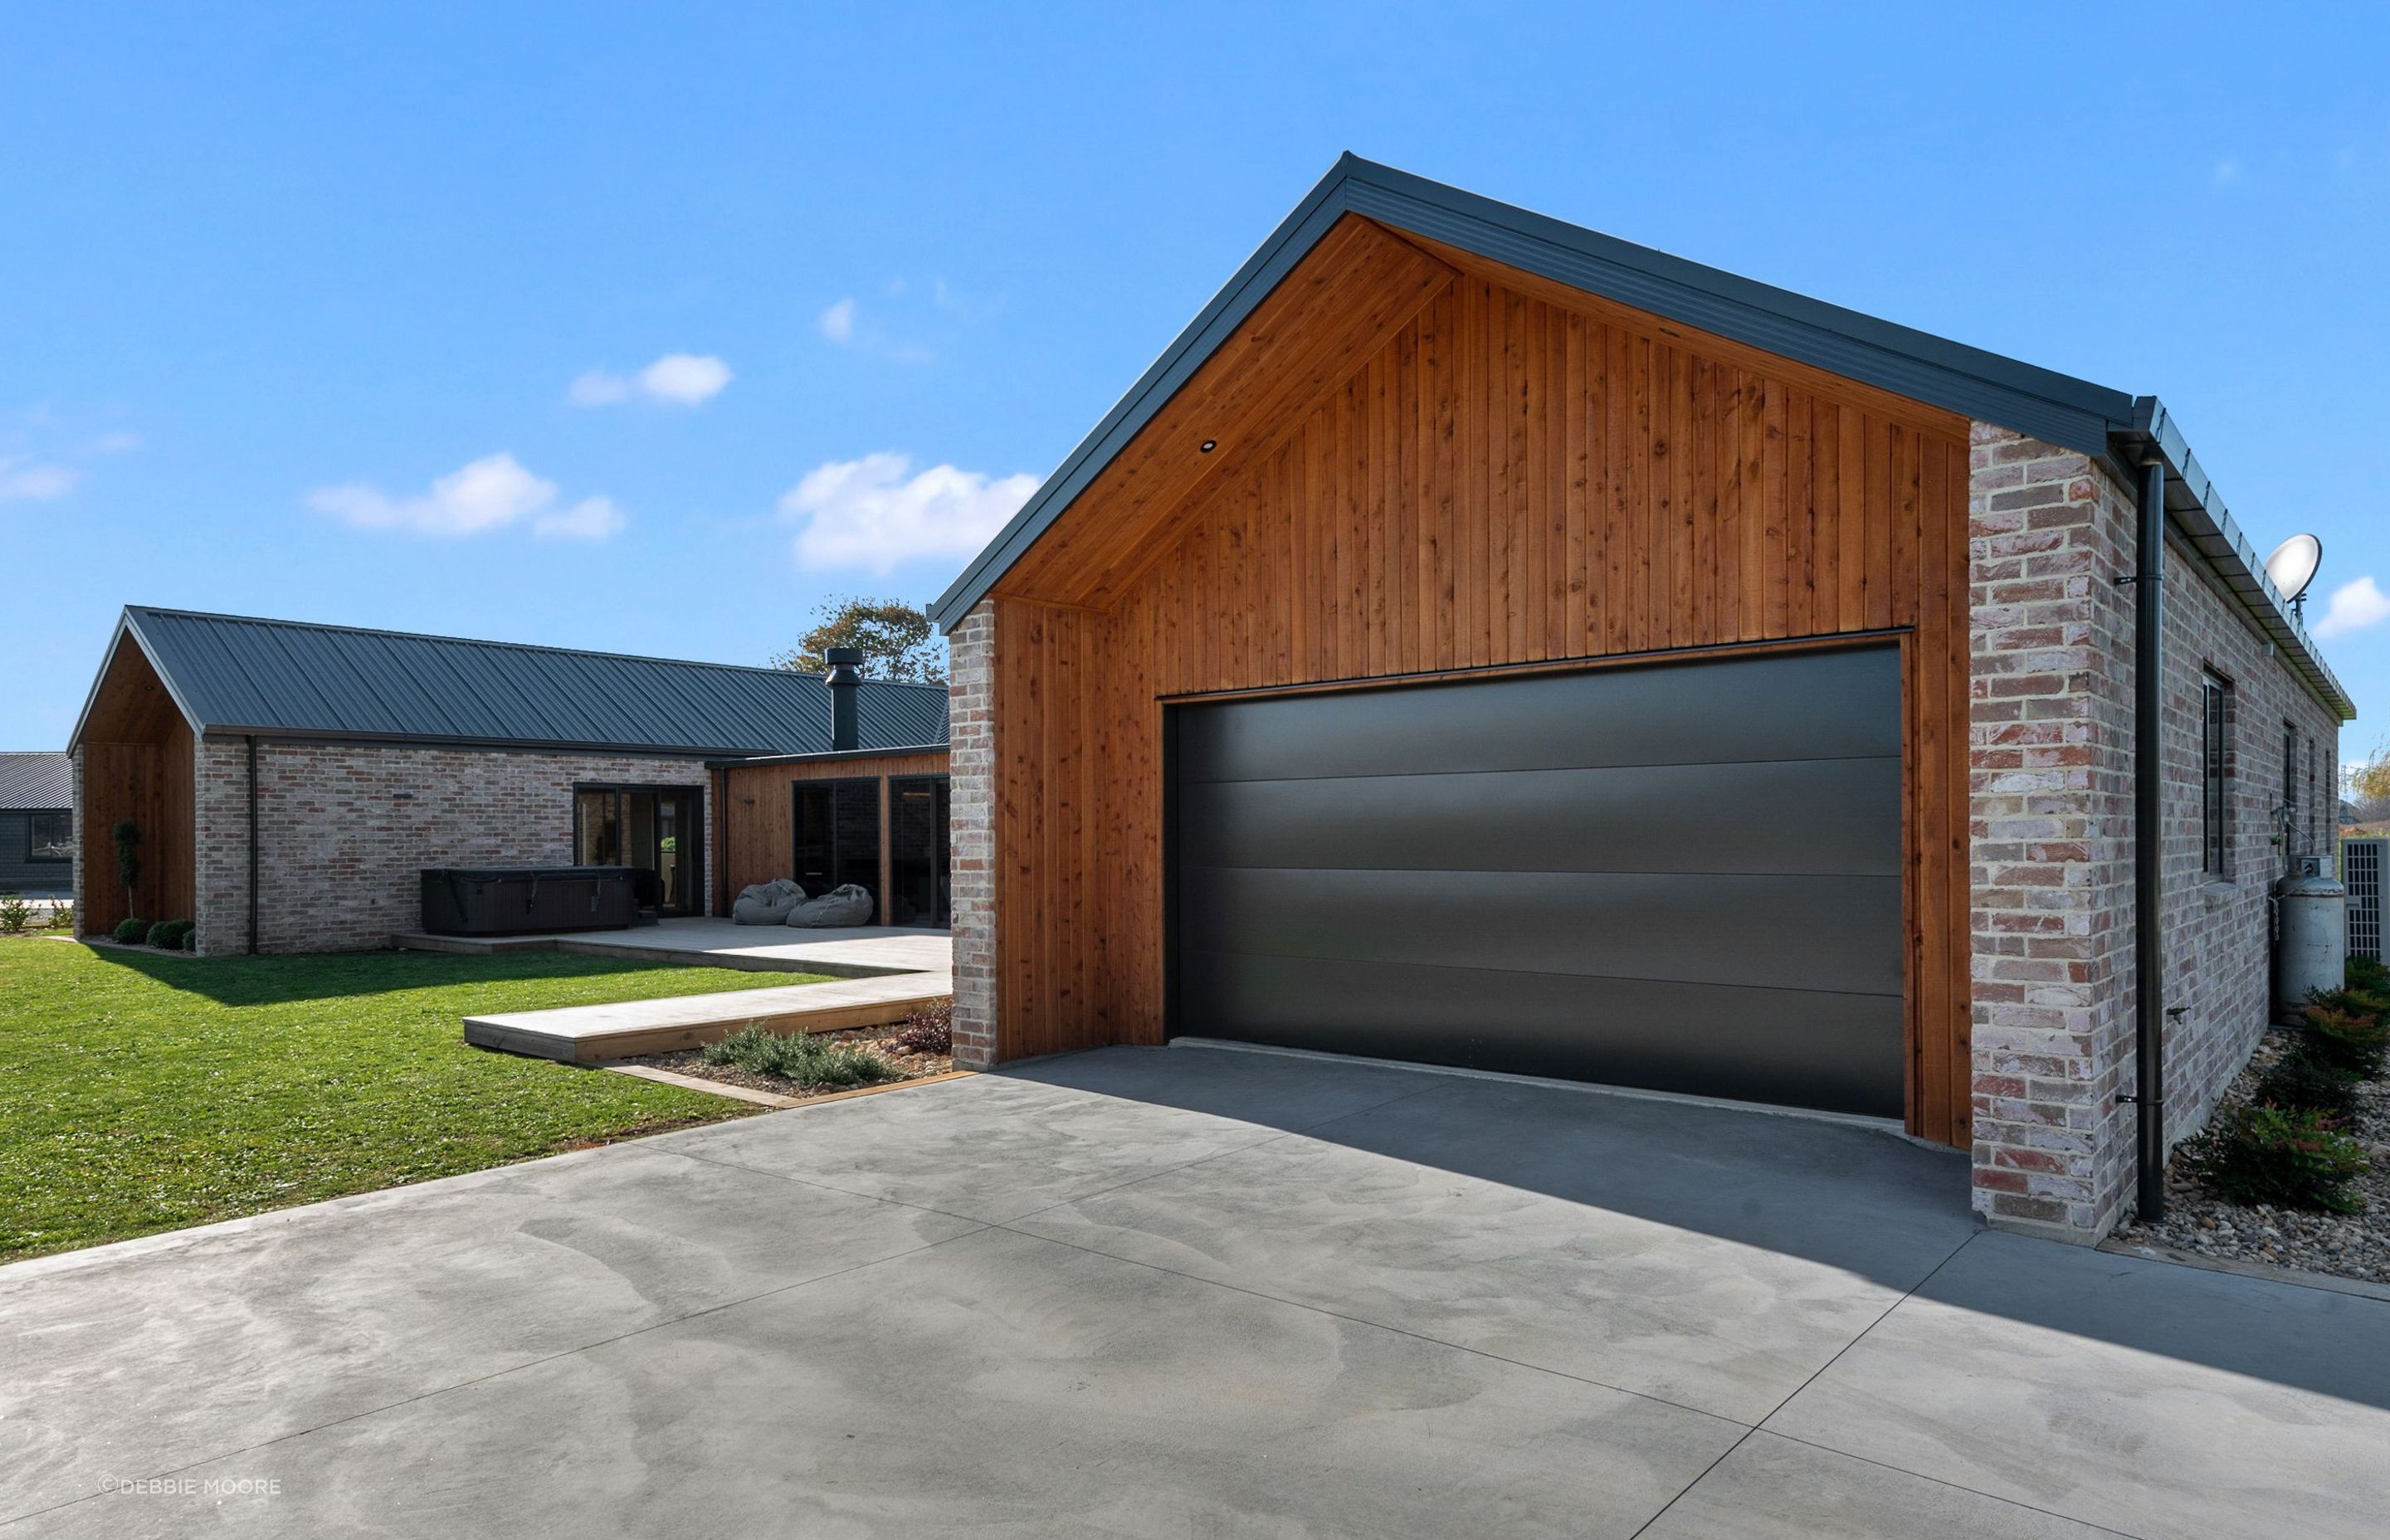 The site in Pirongia is just under an acre in a new development. “There were a couple of homes that were starting to build at the same time,” says architectural designer Rob Camden of Maunga Designs, “and we didn't know what they were going to look like.”